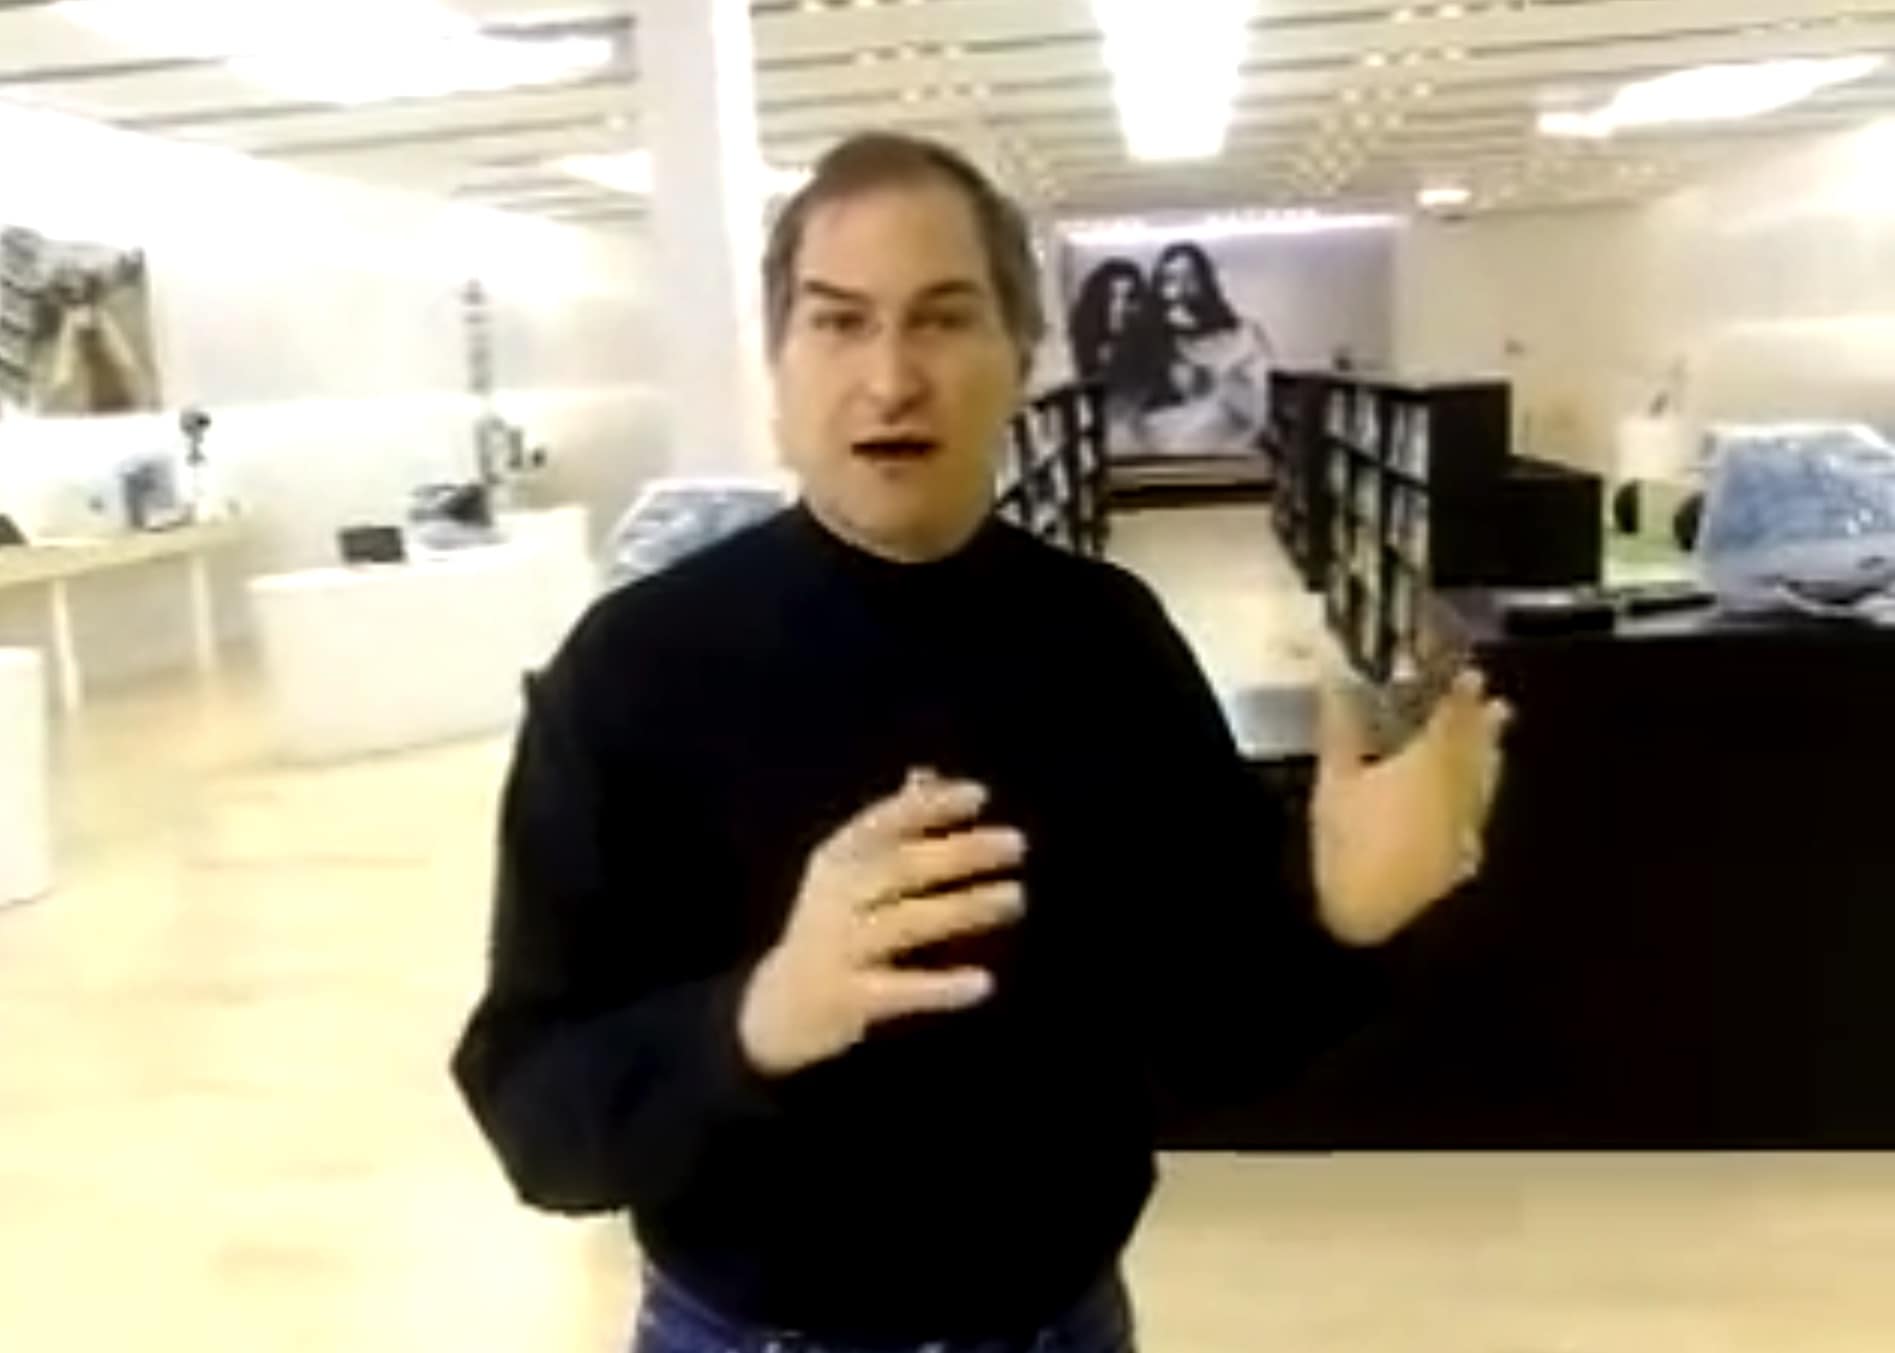 Steve Jobs offers a sneak peek at the first Apple store prior to its opening.